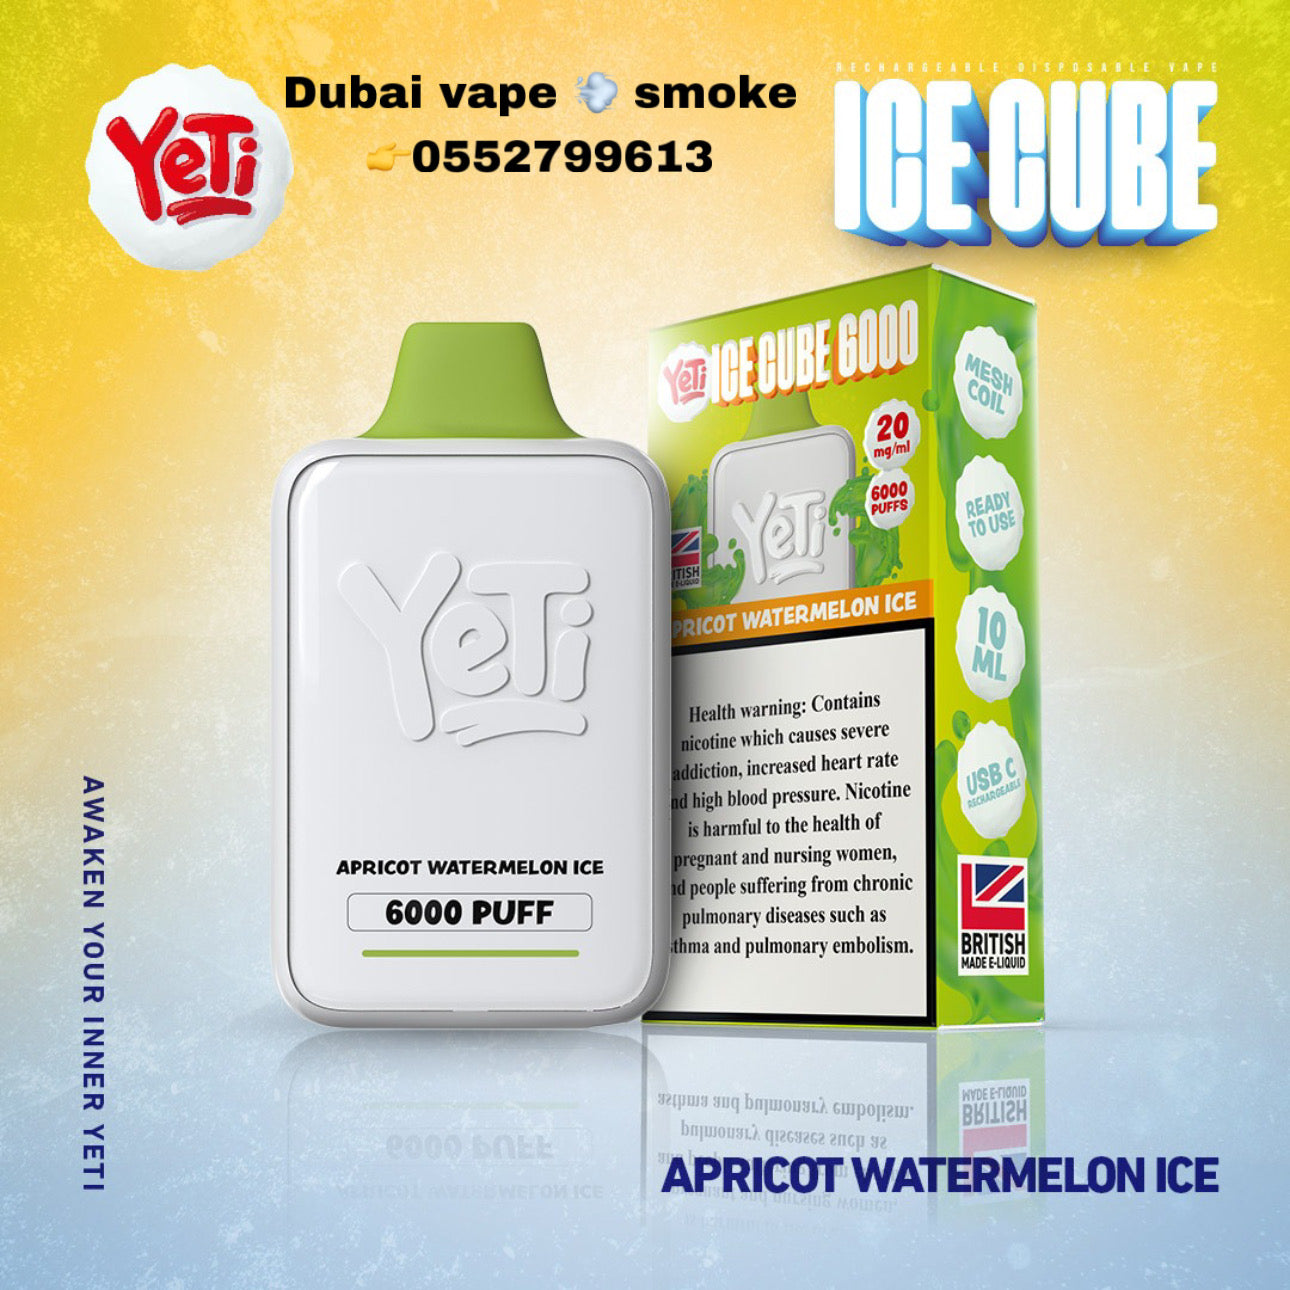 Yeti Ice Cube Disposable 6000 puffs